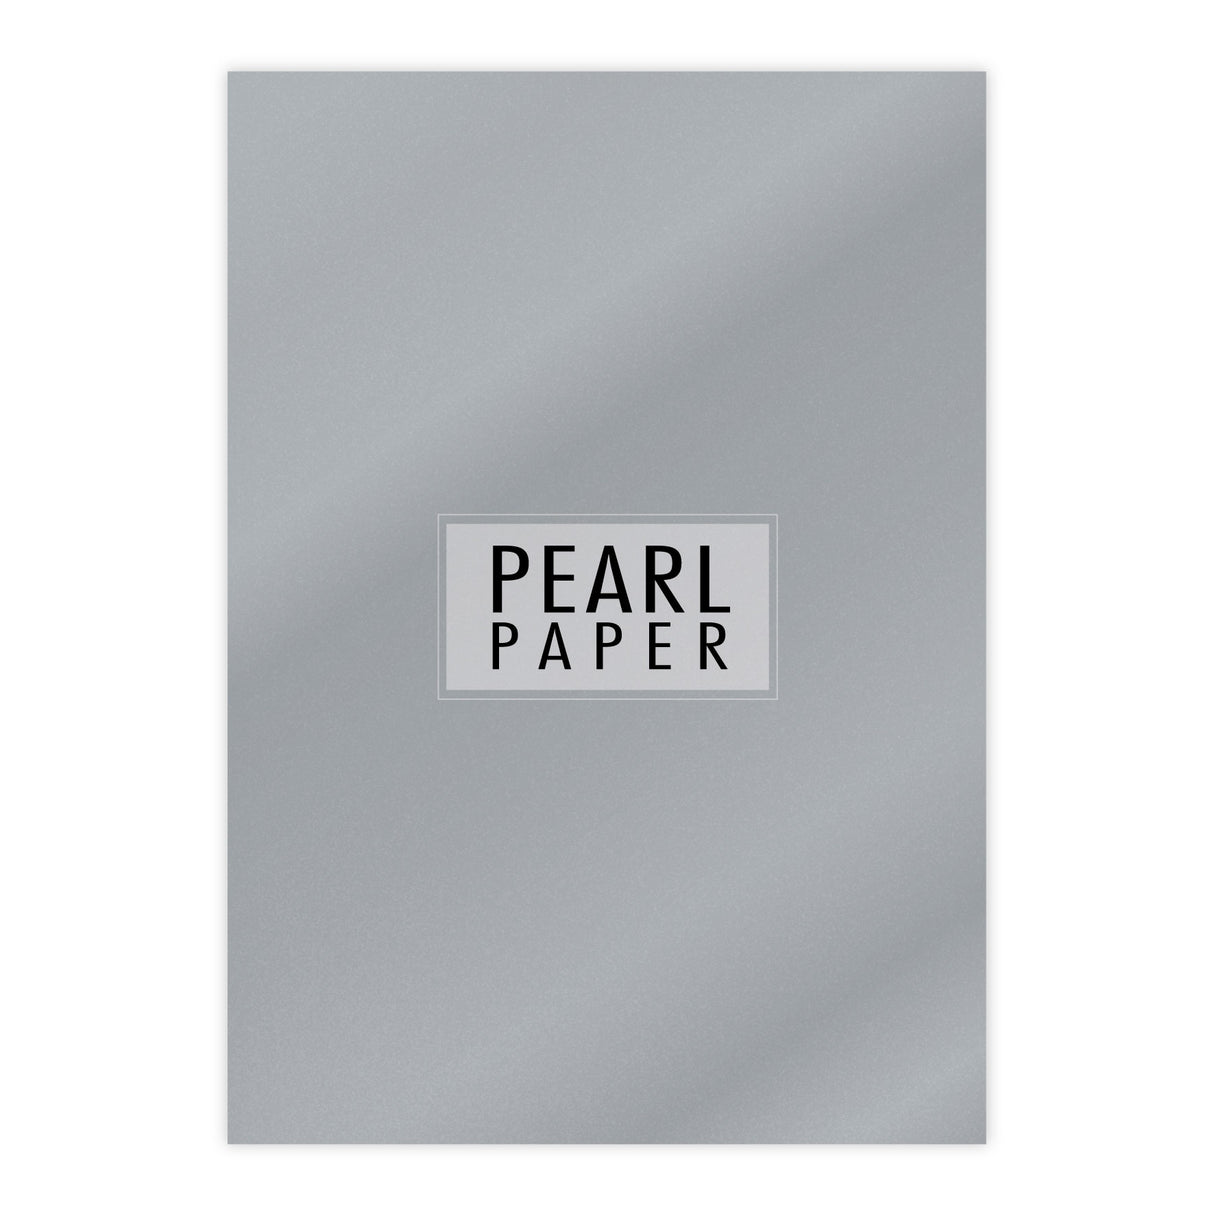 Chloes A4 Luxury Pearl Paper 10 Sheets Silver